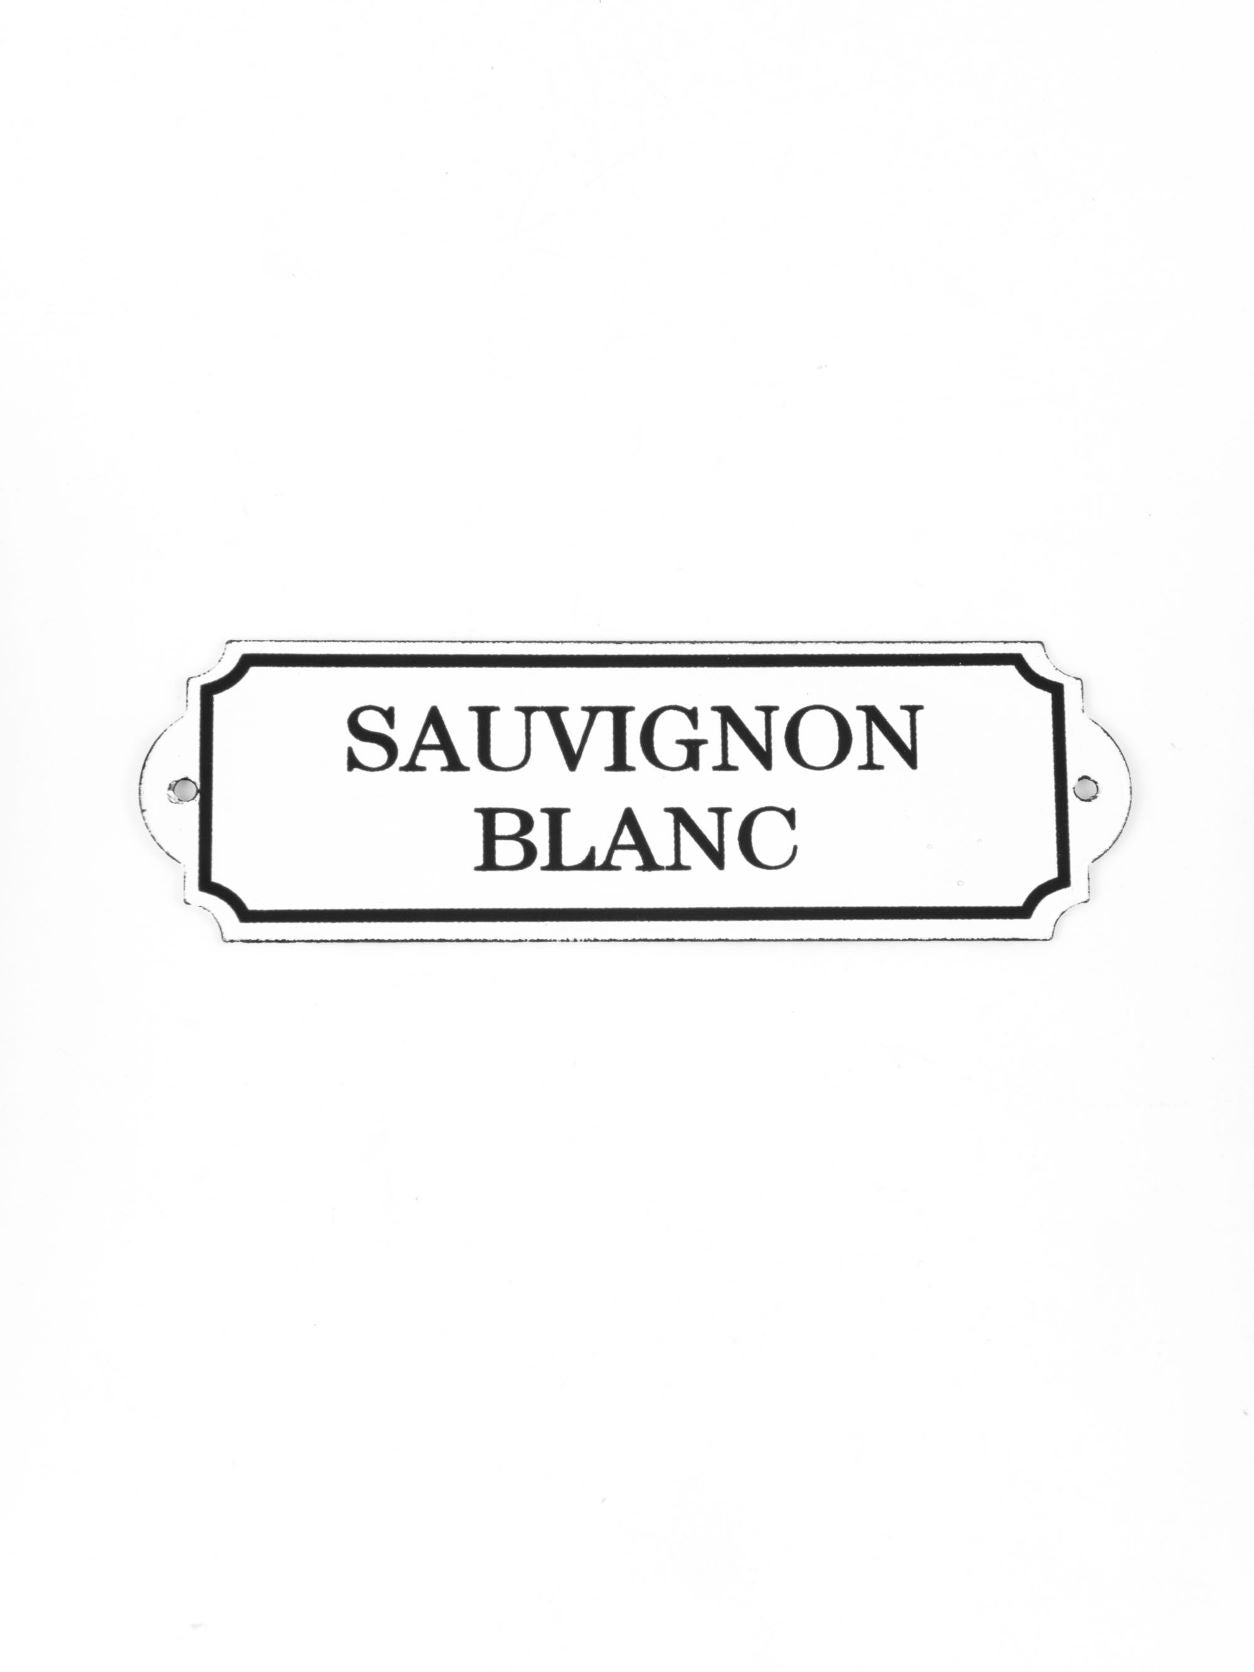 Orban & Sons Enamel Wine Signs Sauvignon Blanc Decor Orban & Sons Brand_Orban & Sons CLEAN OUT SALE Enamelware Home_Decor Numbers Orban & Sons Orban_SonsEnamelSauvignonBlancSign